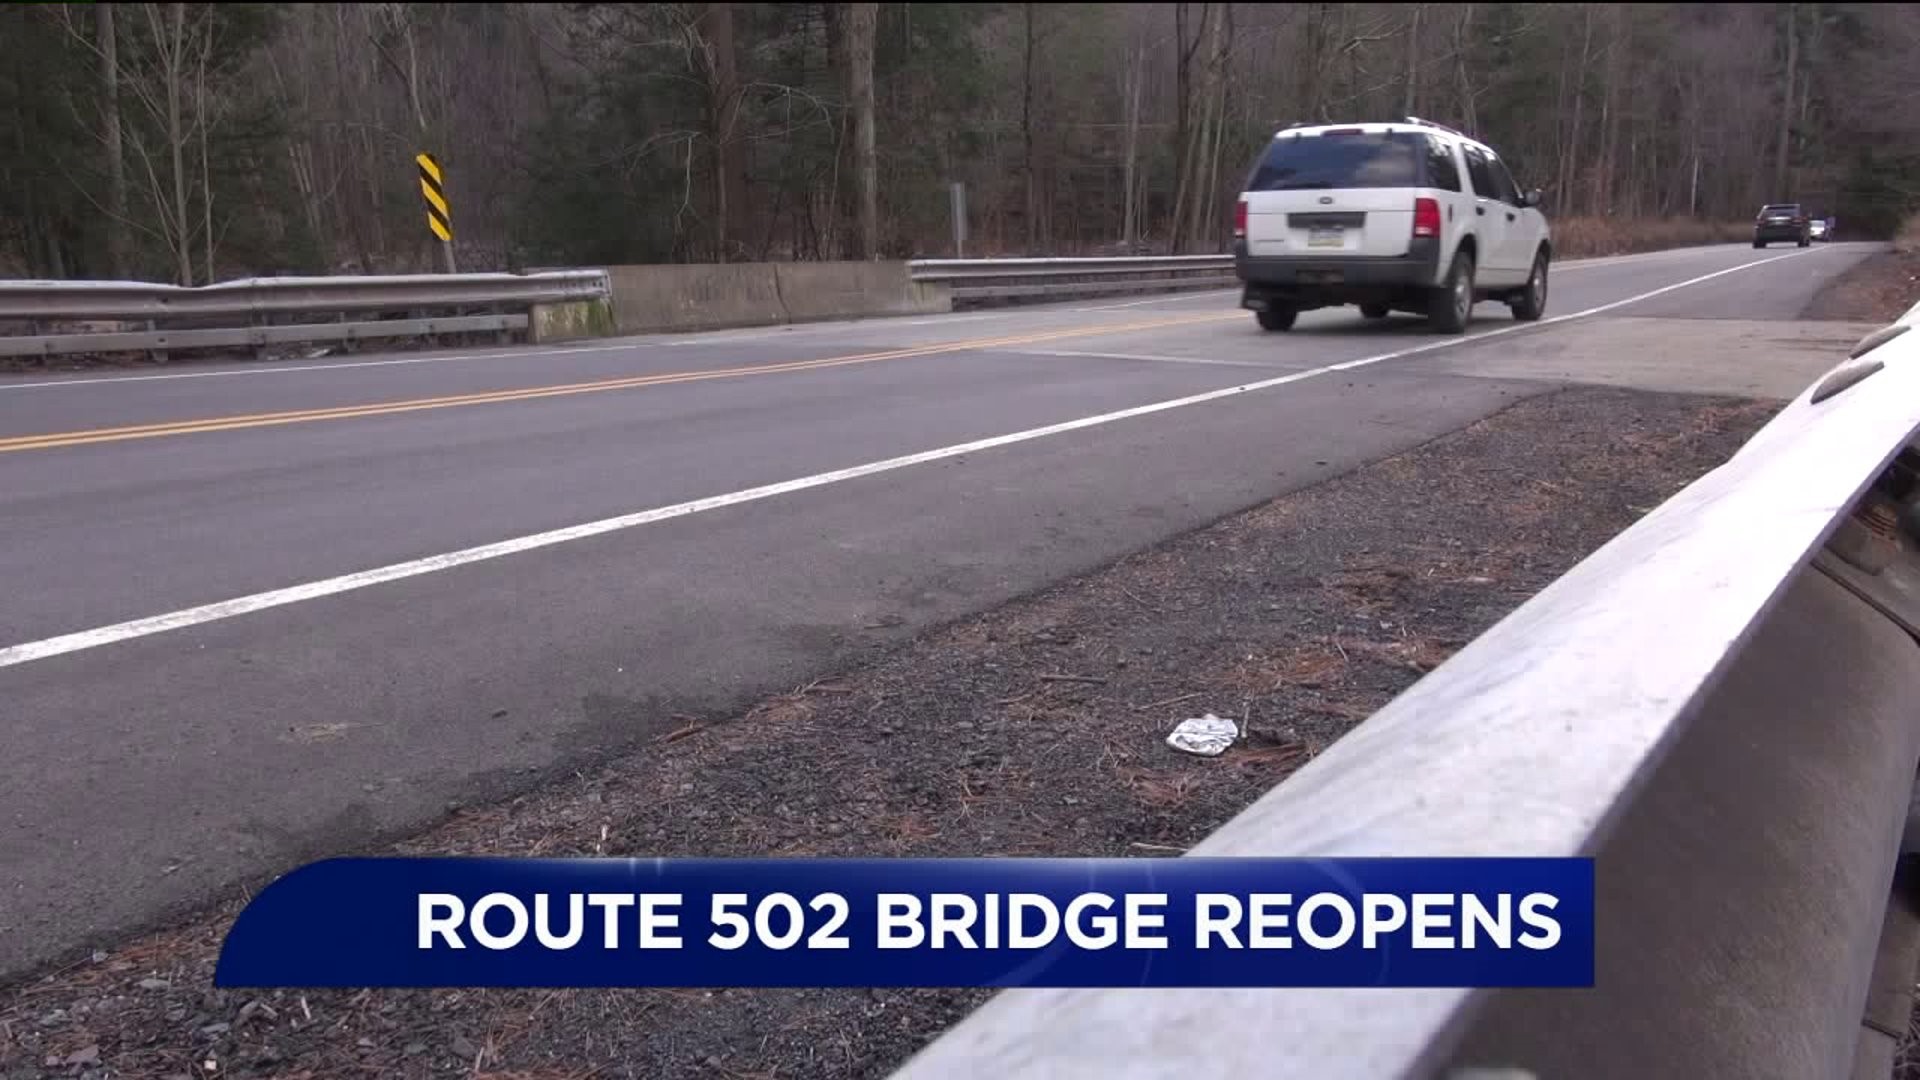 Route 502 Bridge Reopens After Repairs